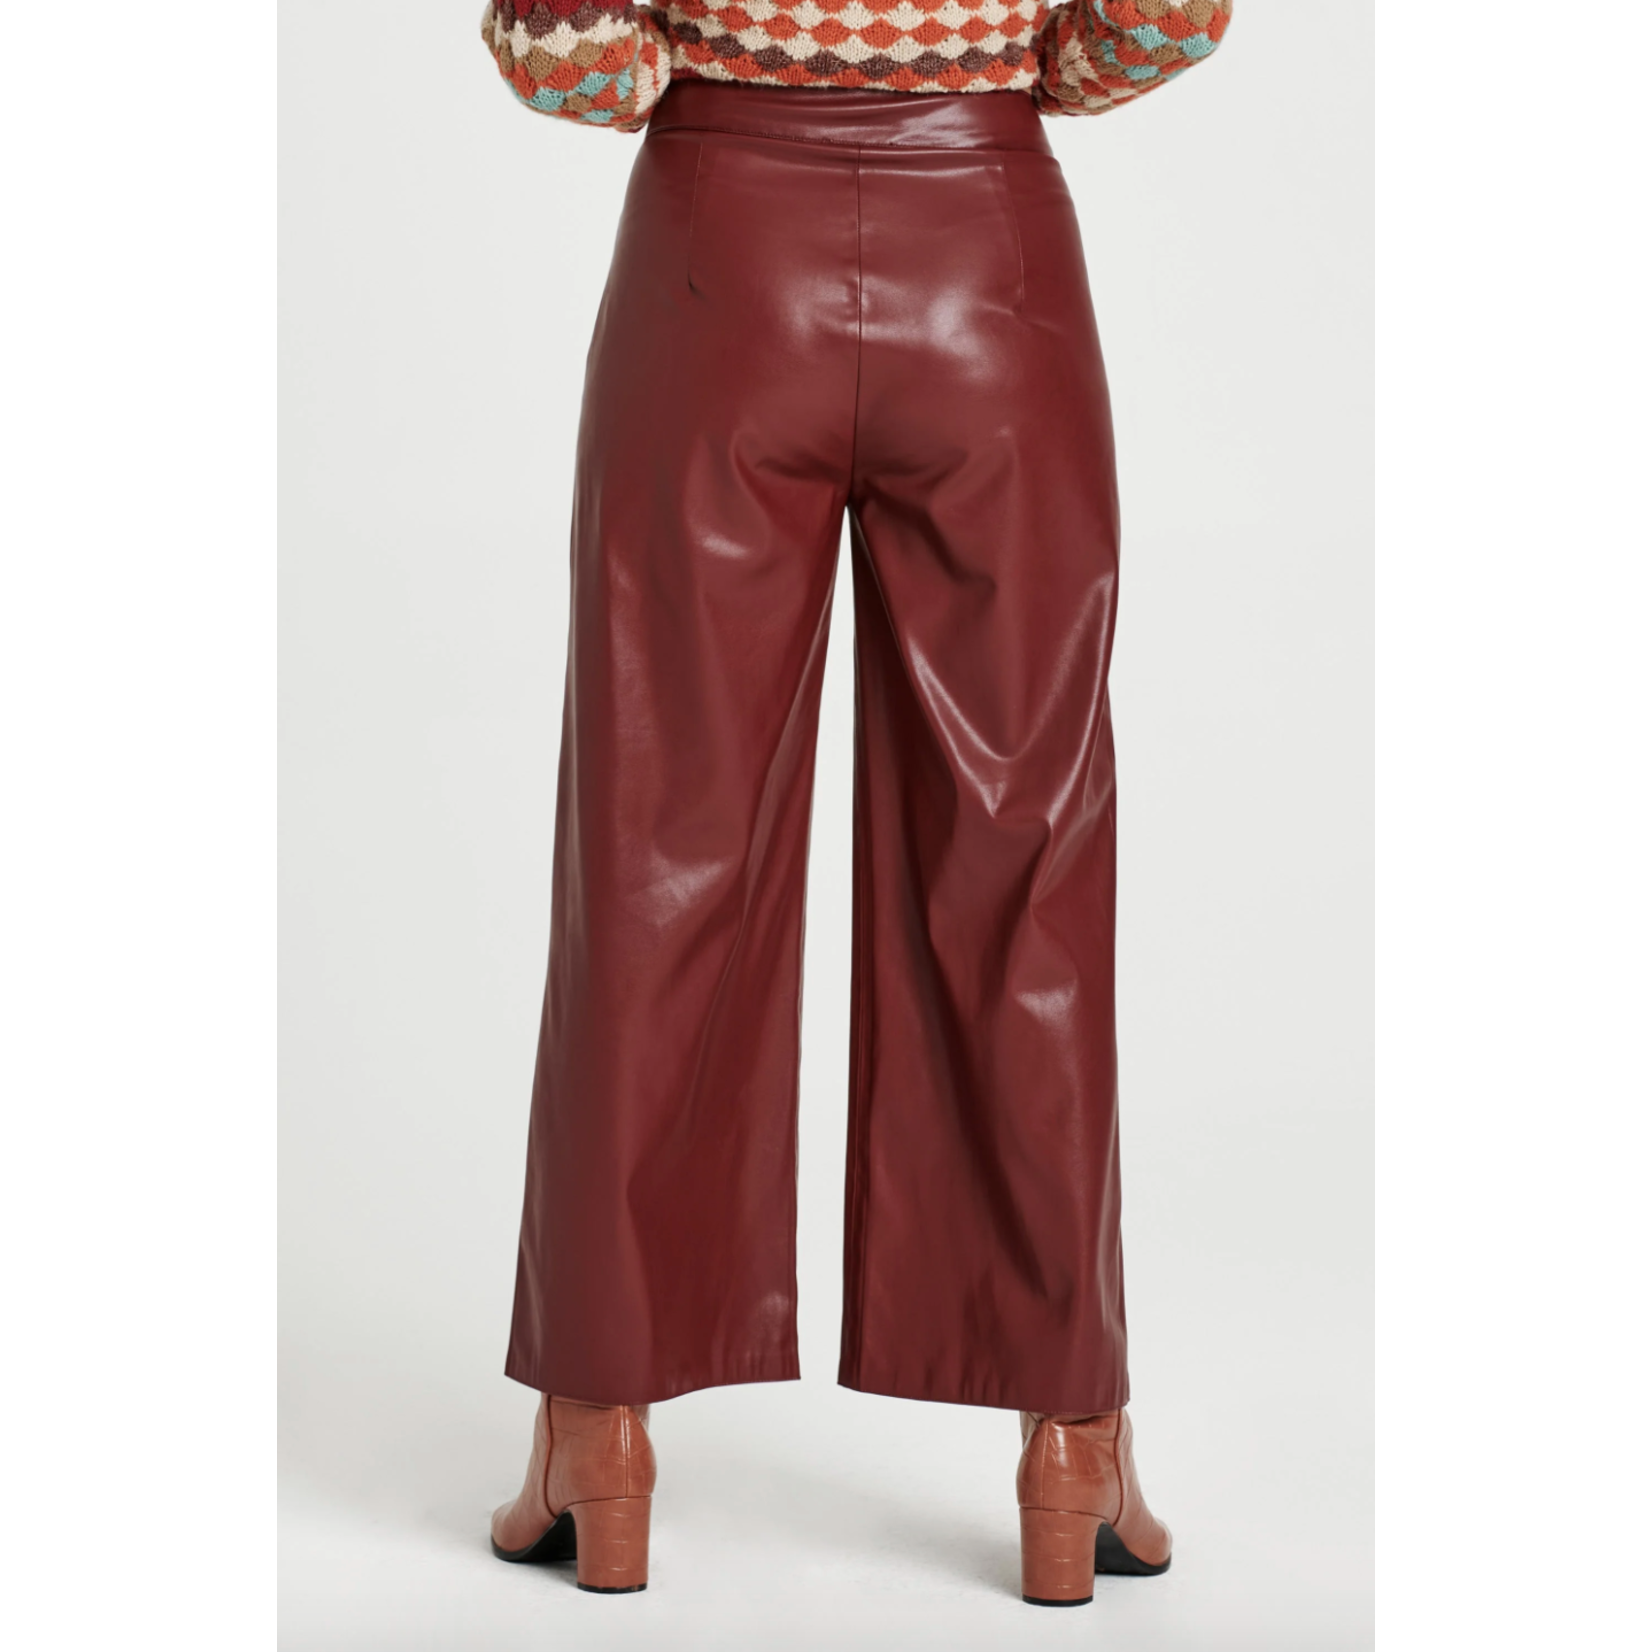 Another Love Sparkle Wide Leg Faux Leather Pant